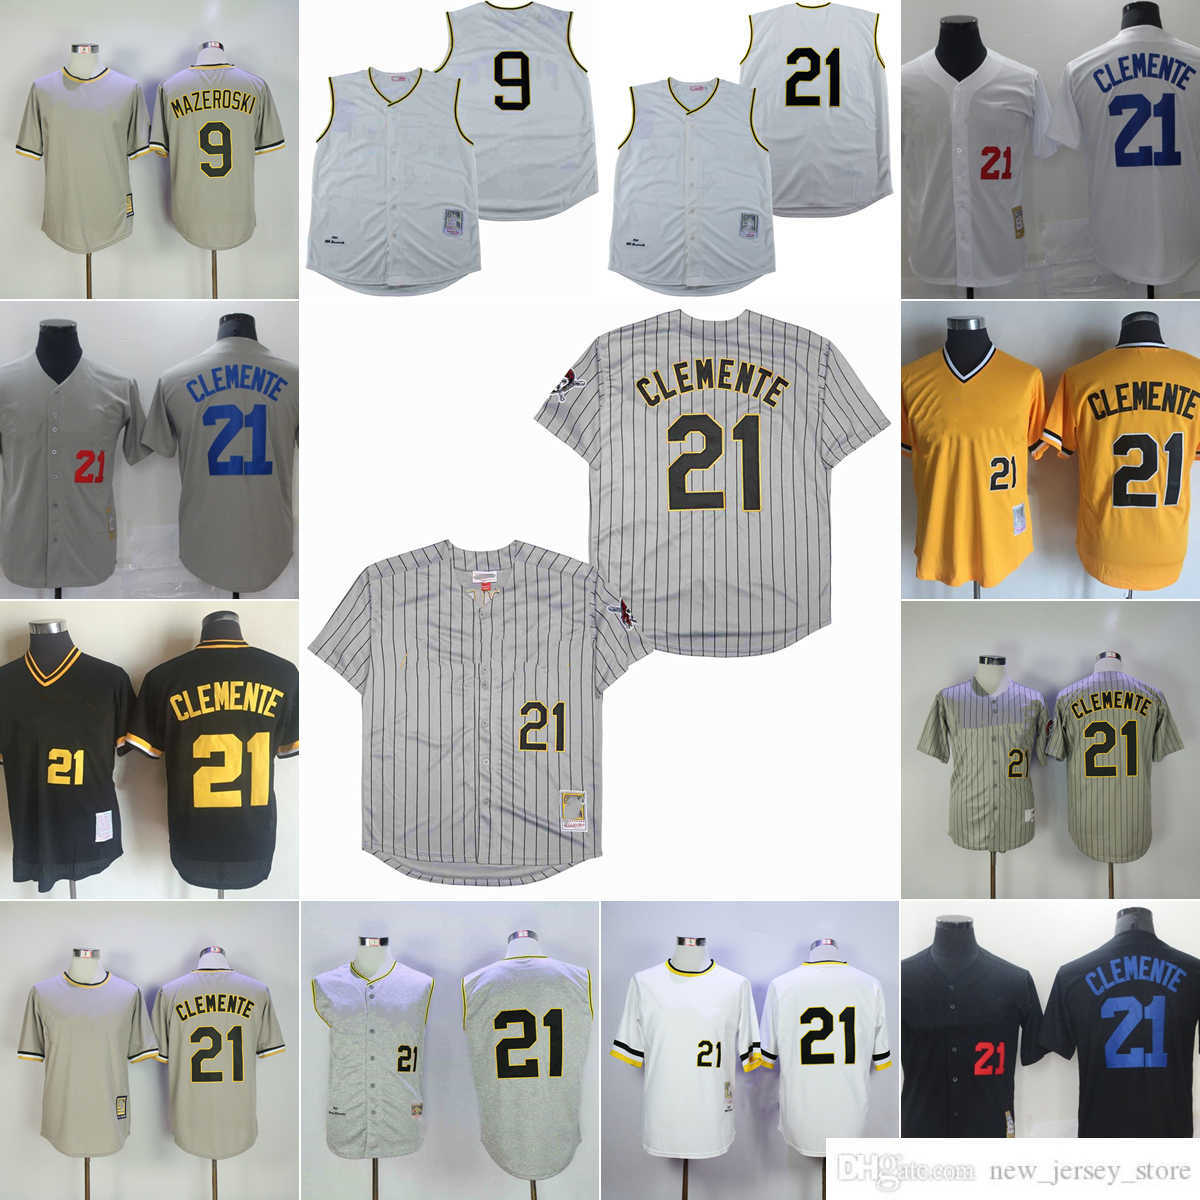 

Movie Mitchell and Ness Baseball 21 Roberto Clemente Jerseys Vintage Stitched 9 Bill Mazeroski Breathable Sport White Grey yellow black Pullover, Vintage (with team name)